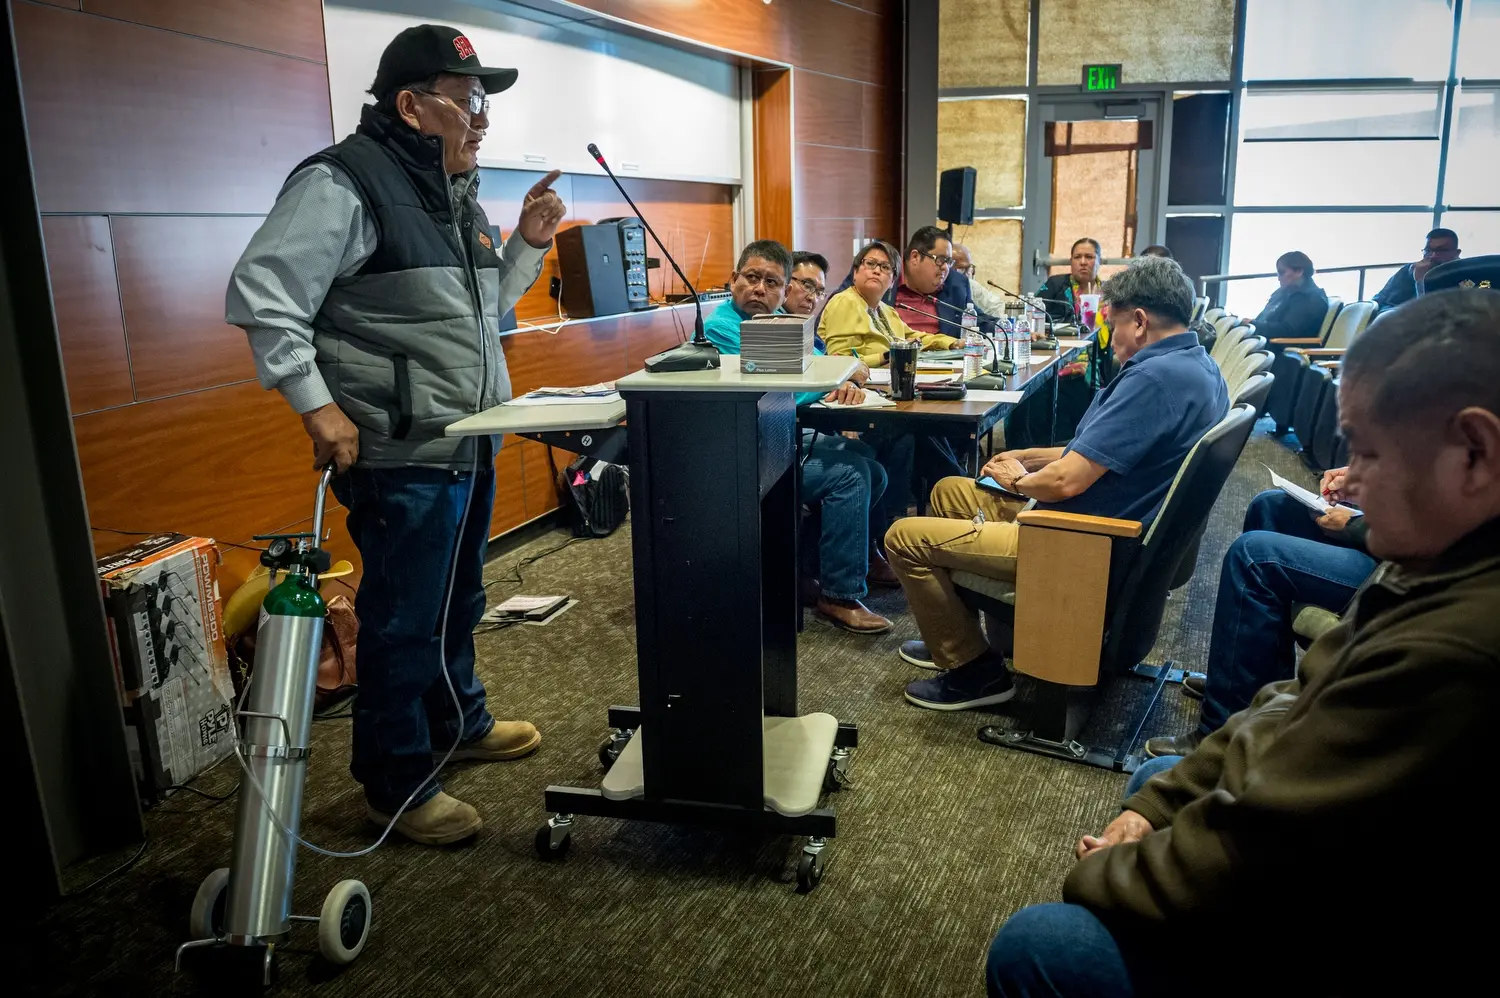 Leslie Begay, 65, is pictured attending a uranium public hearing sponsored by the Navajo Nation Council at Diné College in Shiprock, N.M. Image by Mary F. Calvert. United States, 2020.